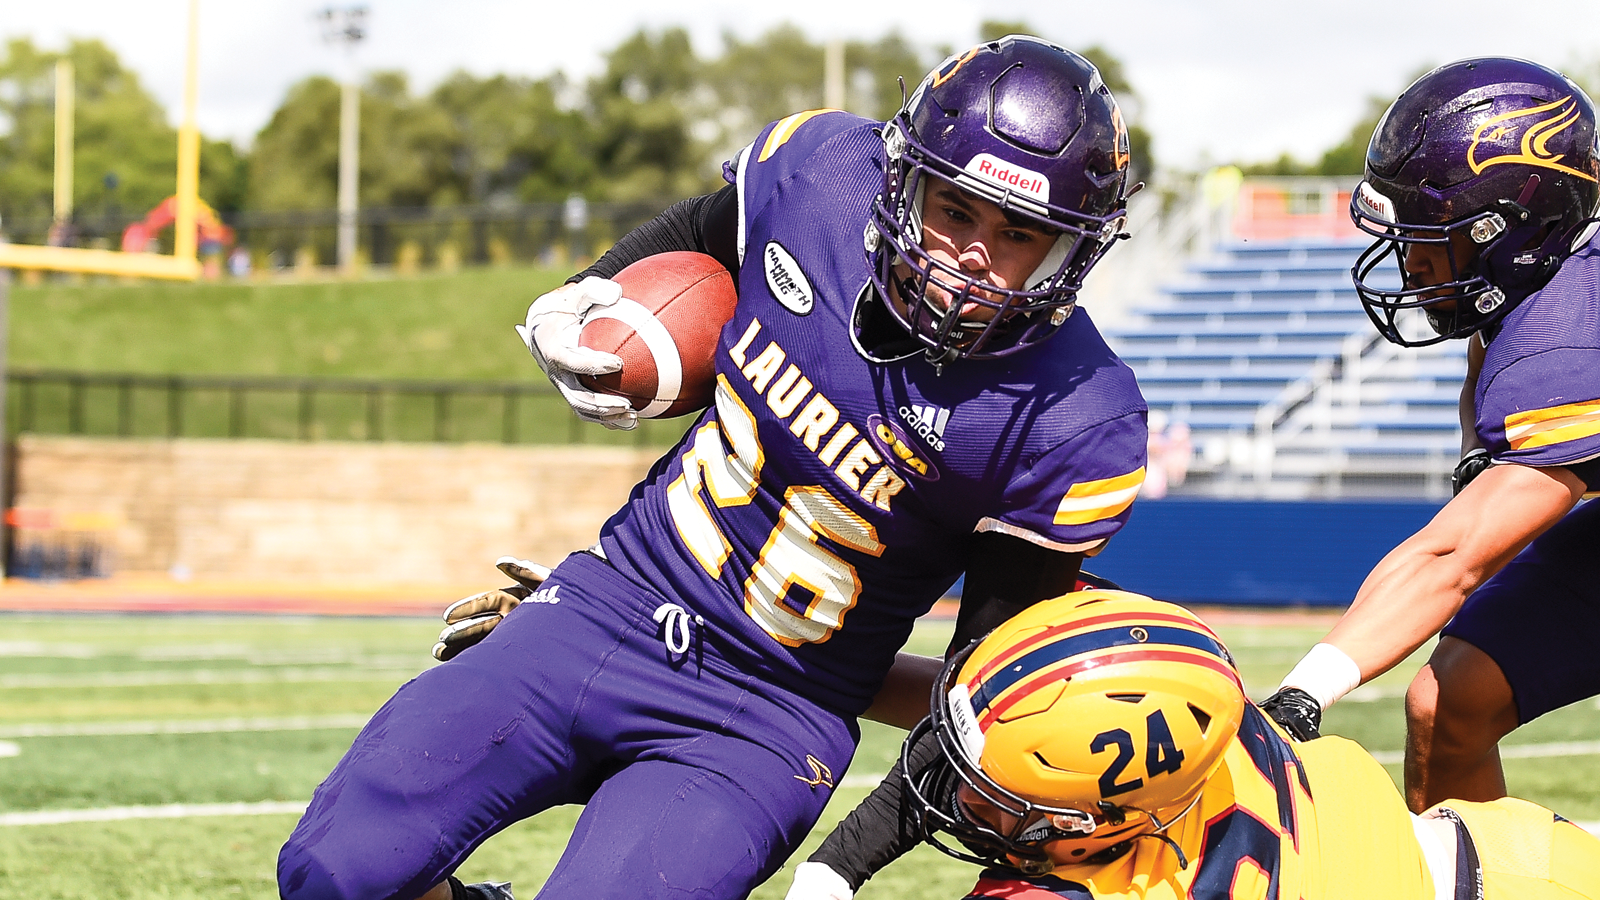 Laurier's Ethan Bayfield running with the ball while being tackled by a Queen's defender